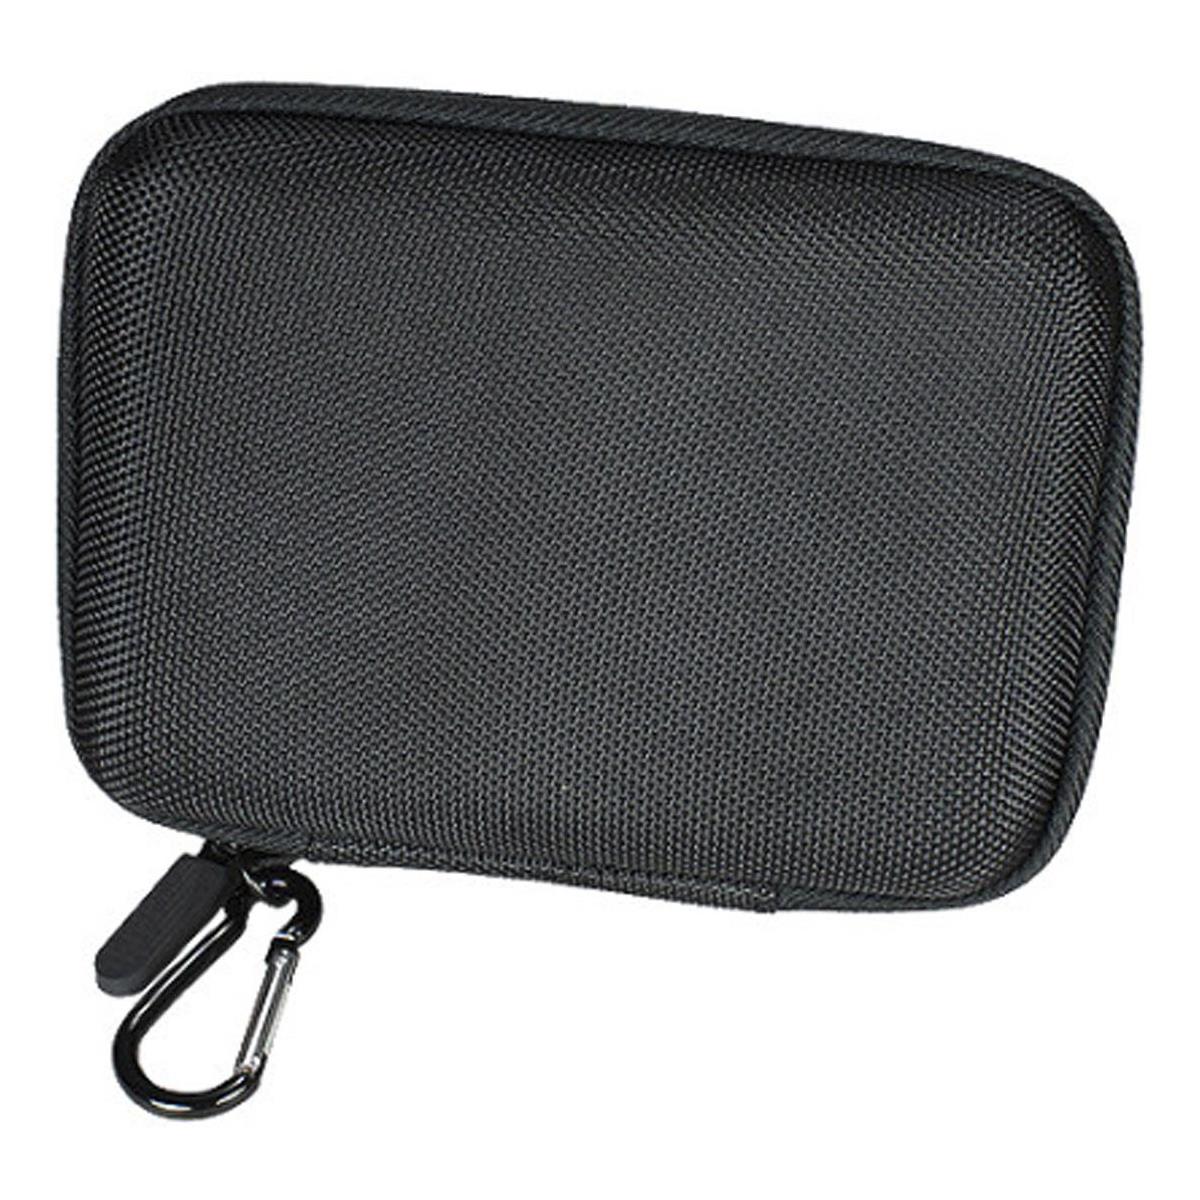 Image of Ambient Recording ATE-Box Emesser Bag for Emesser Kit